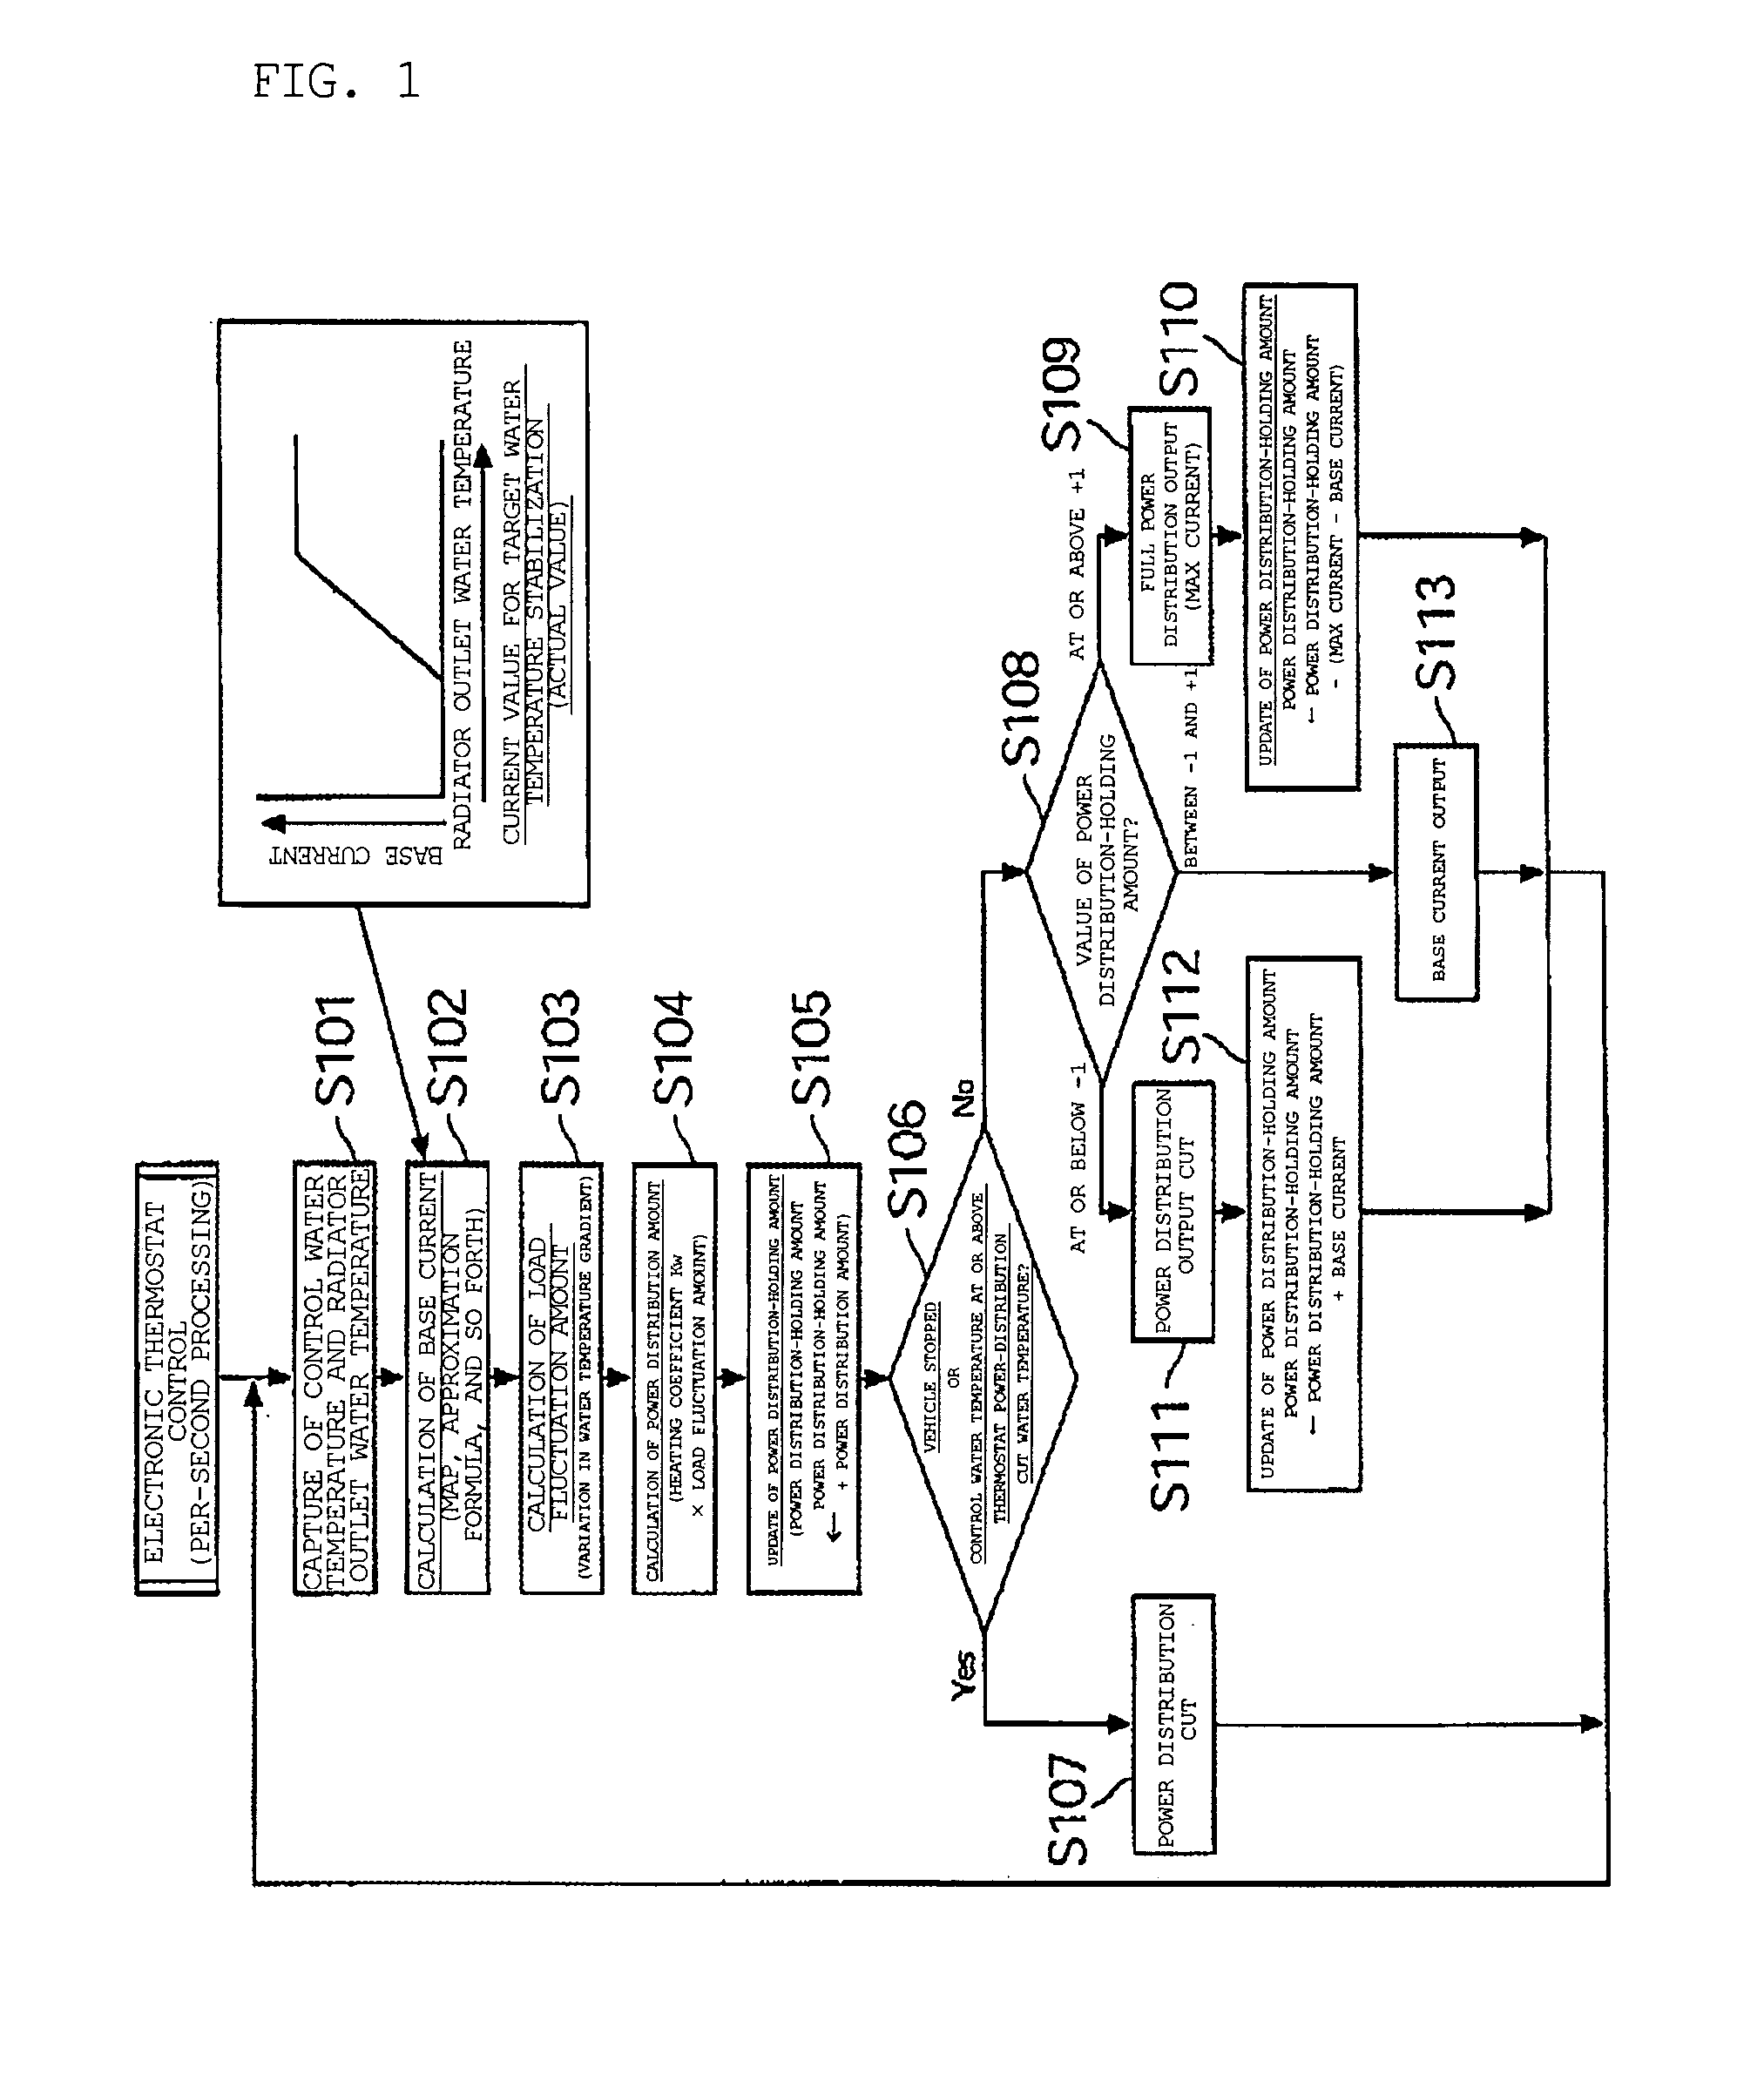 Control method for electronically controlled thermostat